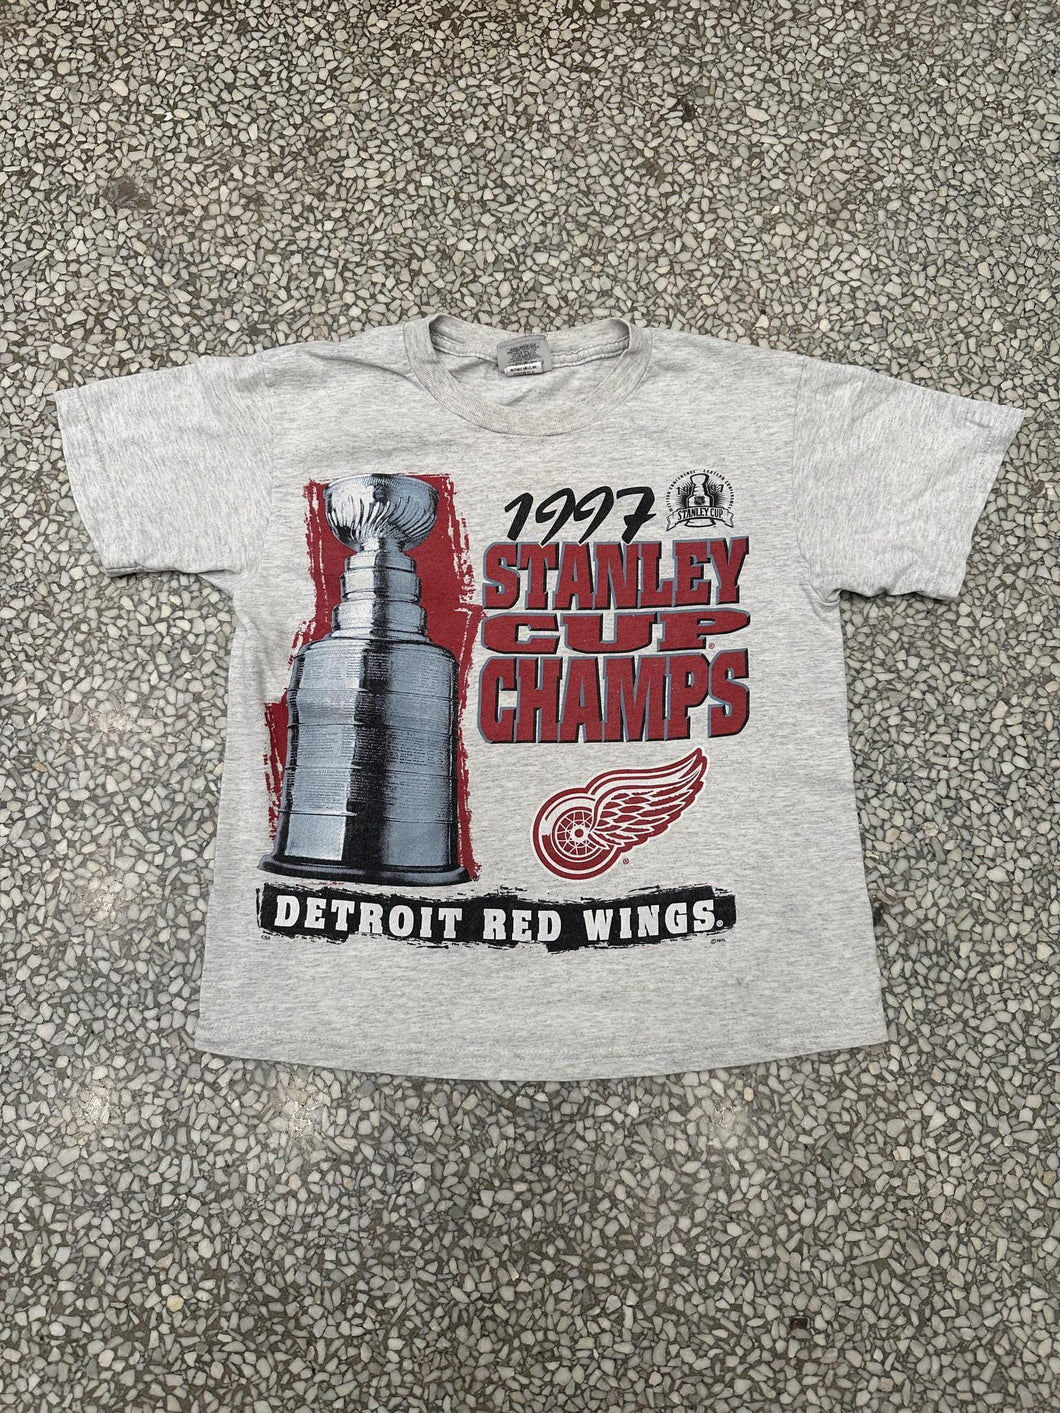 Detroit Red Wings Vintage 1997 Stanley Cup Champs Faded Grey ABC Vintage 